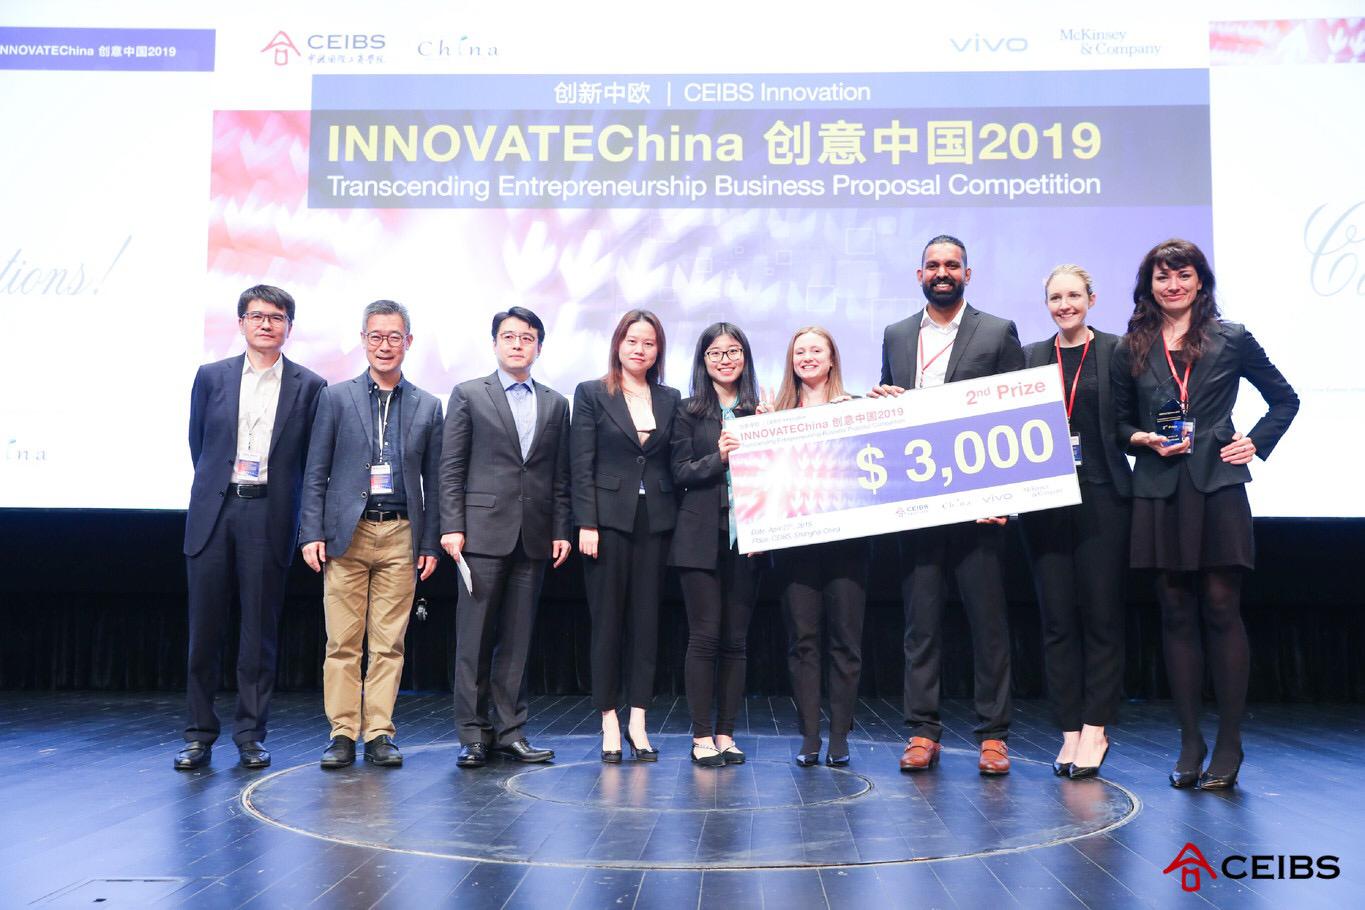 Recycling e-bike batteries earns HEC Paris MBA students 2nd place at INNOVATEChina